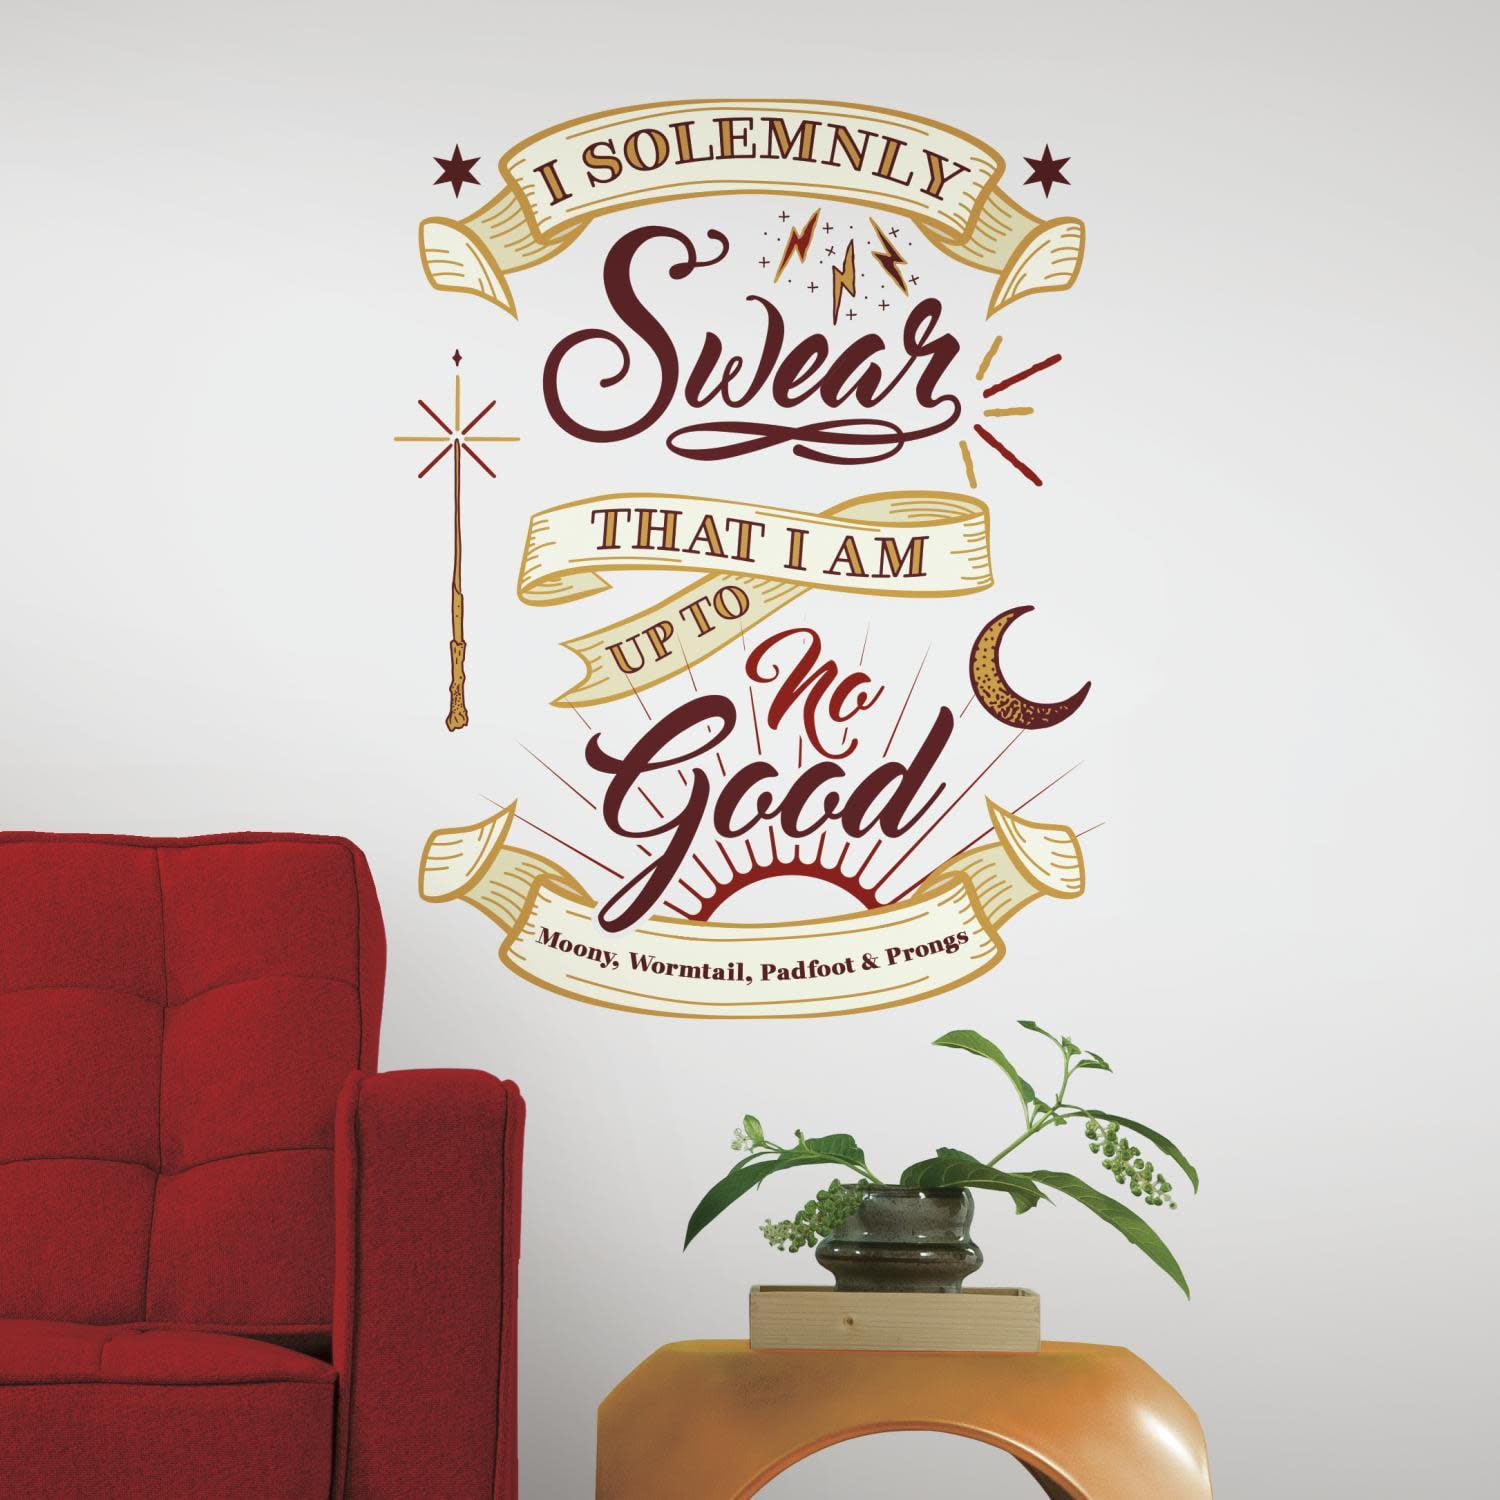 I Solemnly Swear I Am Up To No Good Harry Potter Wall Decal Vinyl Quote Sticker 